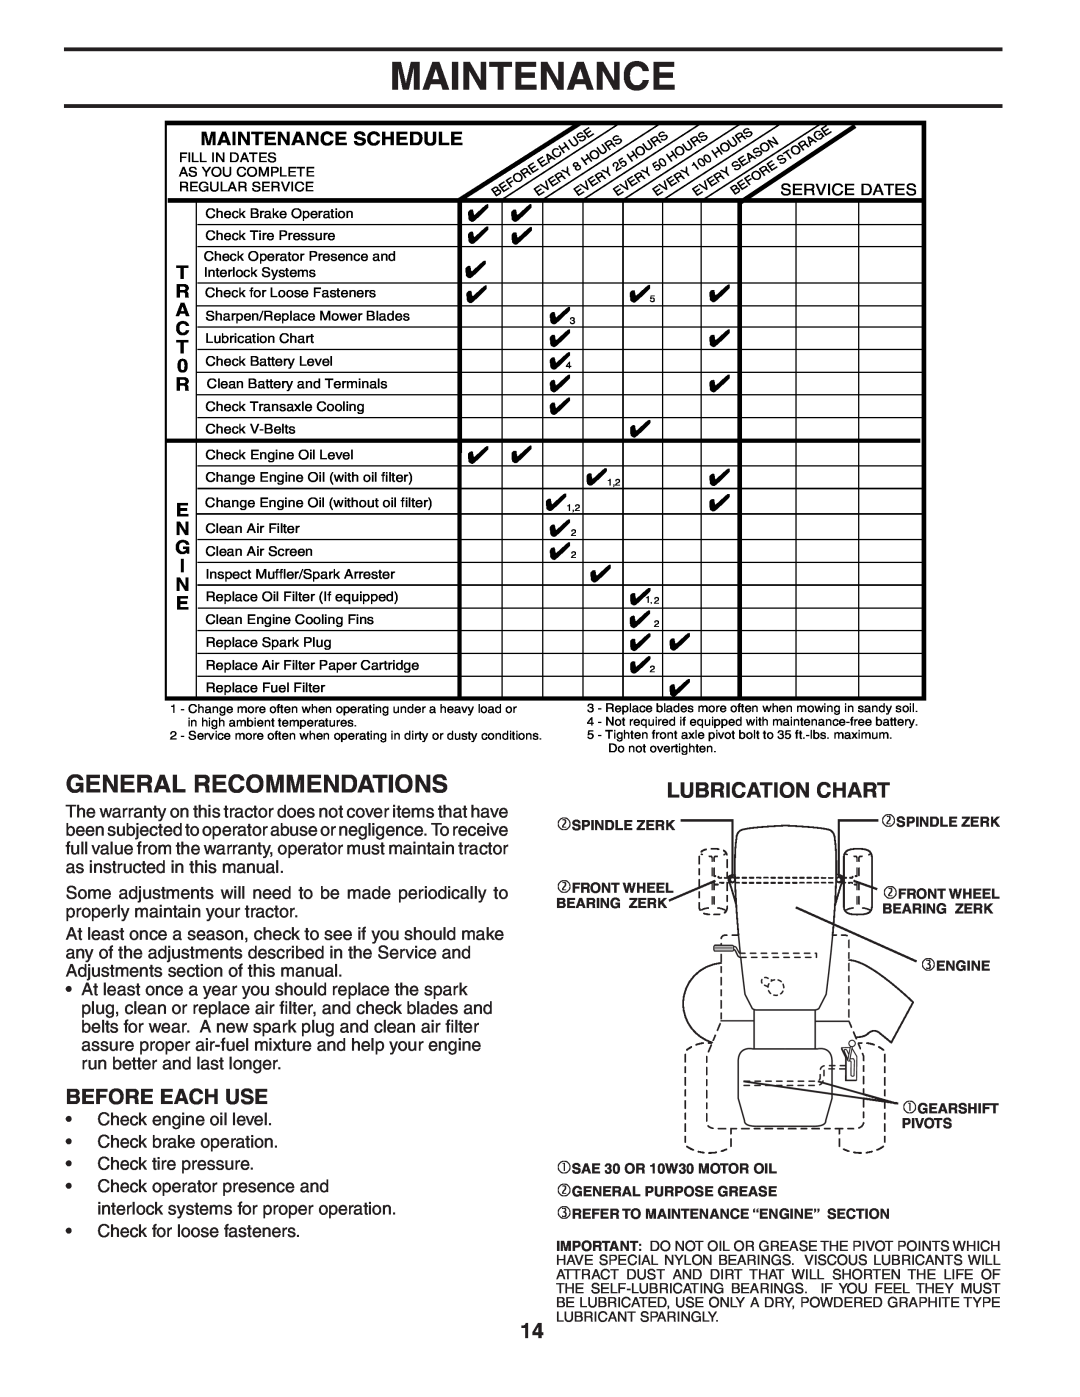 Weed Eater 191087 manual Maintenance, General Recommendations, Before Each Use, Lubrication Chart 